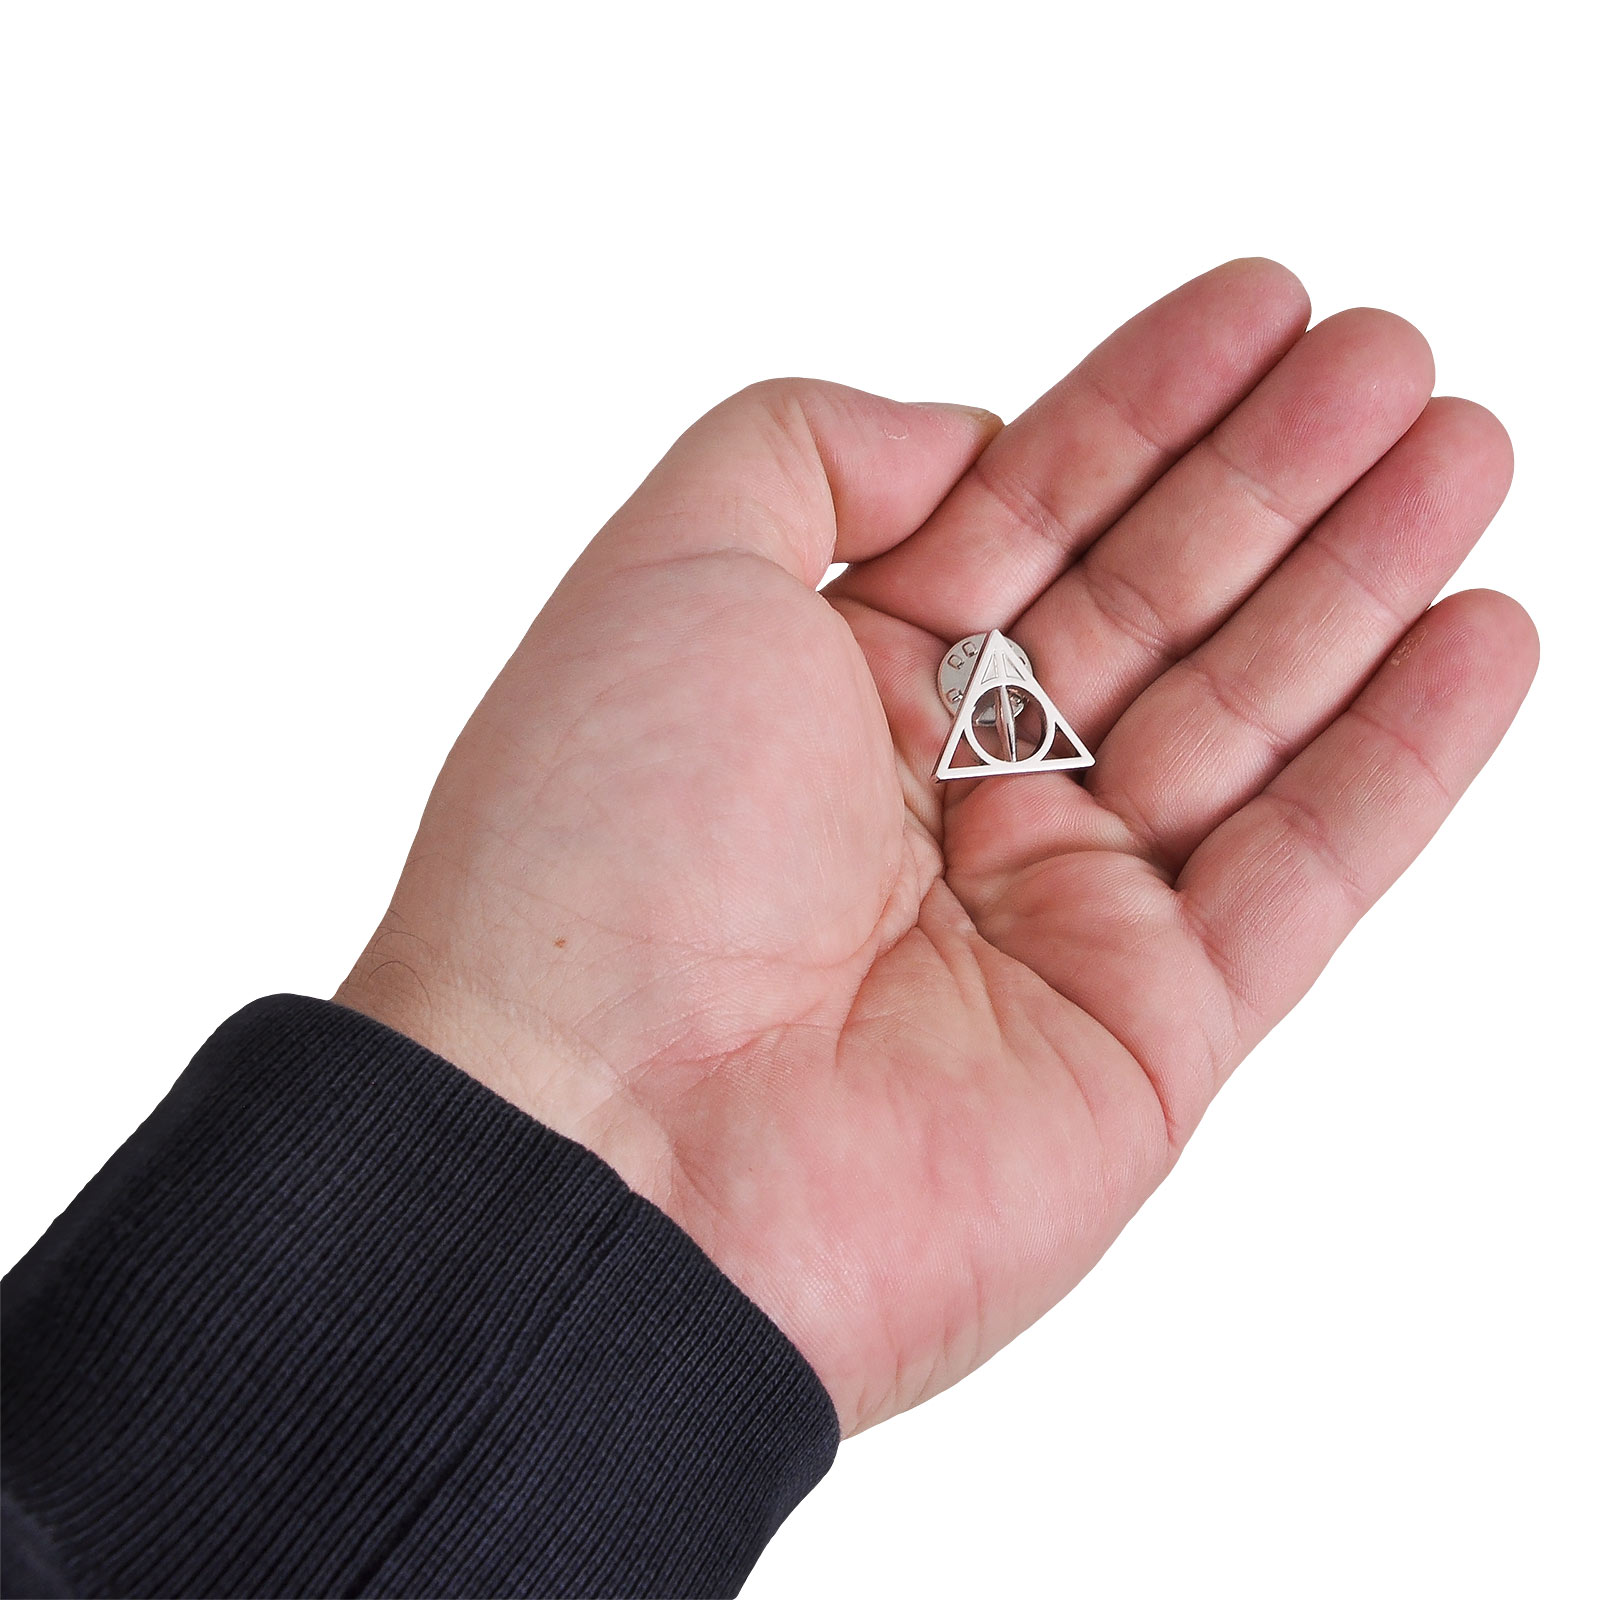 Harry Potter - Deathly Hallows Pin